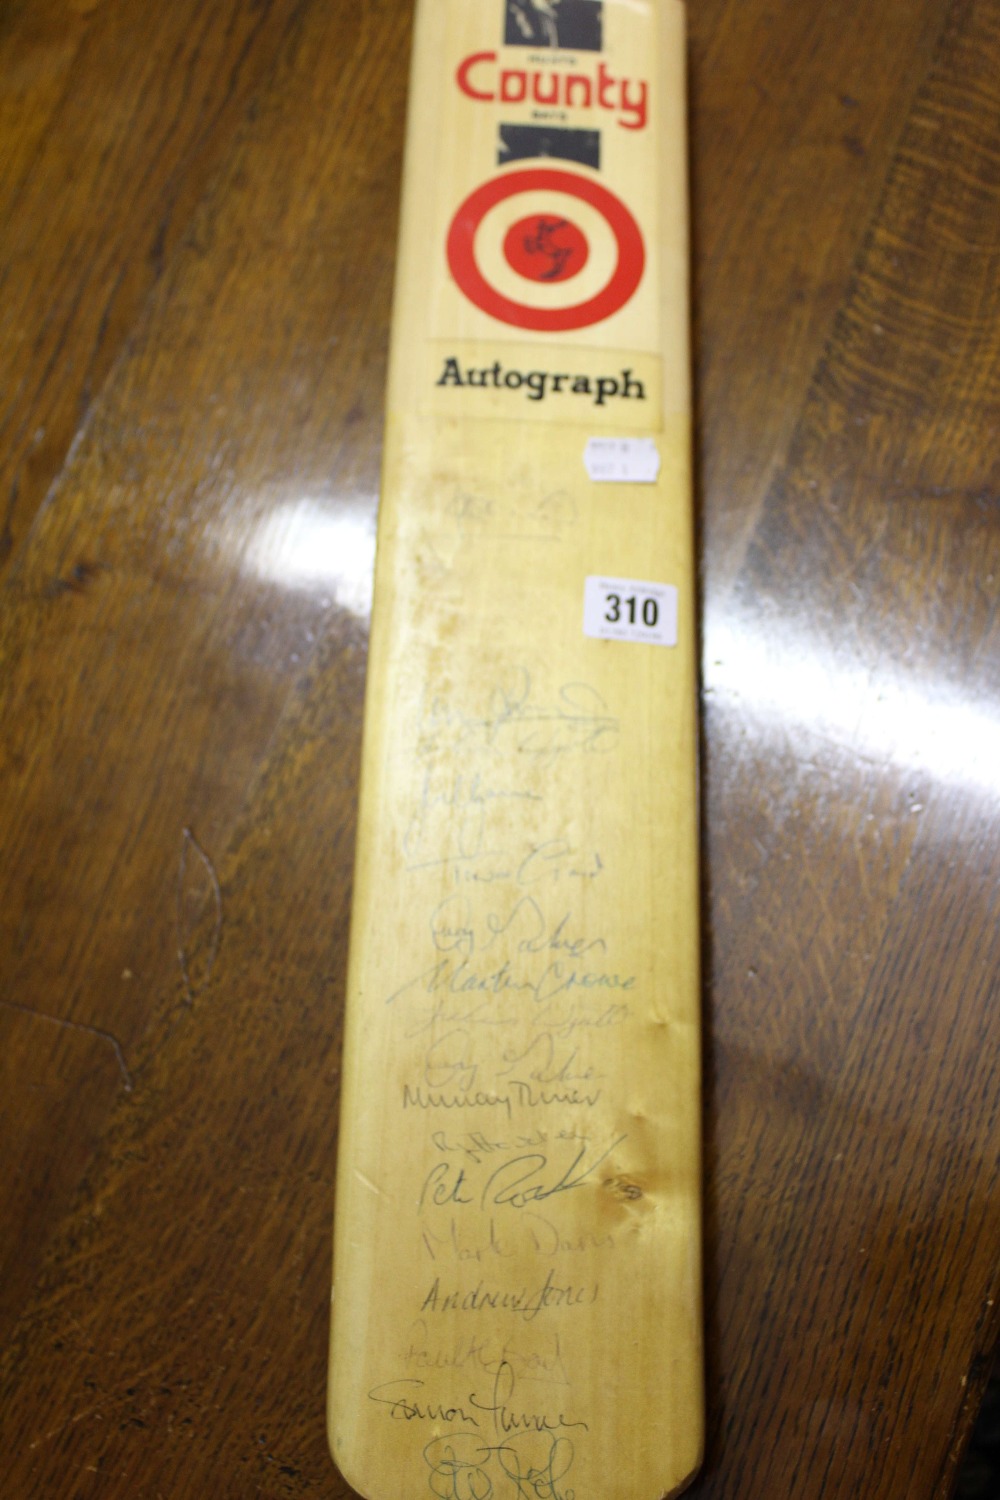 Cricket: Signed Somerset County Cricket Club bat 17 signatures including Martin Crowe